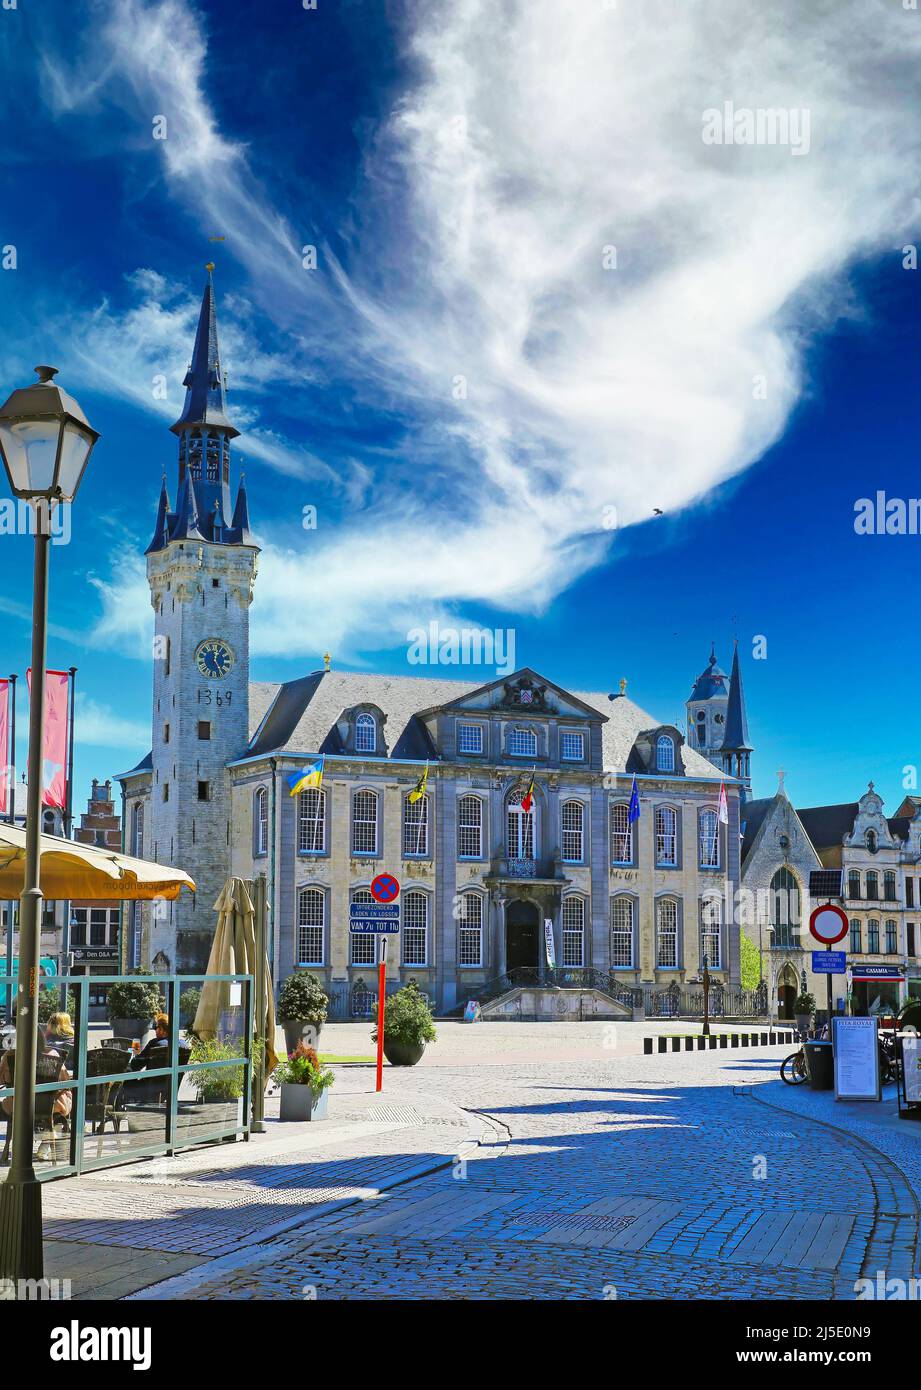 Lier (grote markt), Belgium - April 9. 2022: View over market square on medieval town hall with tower against spectacular blue sky Stock Photo